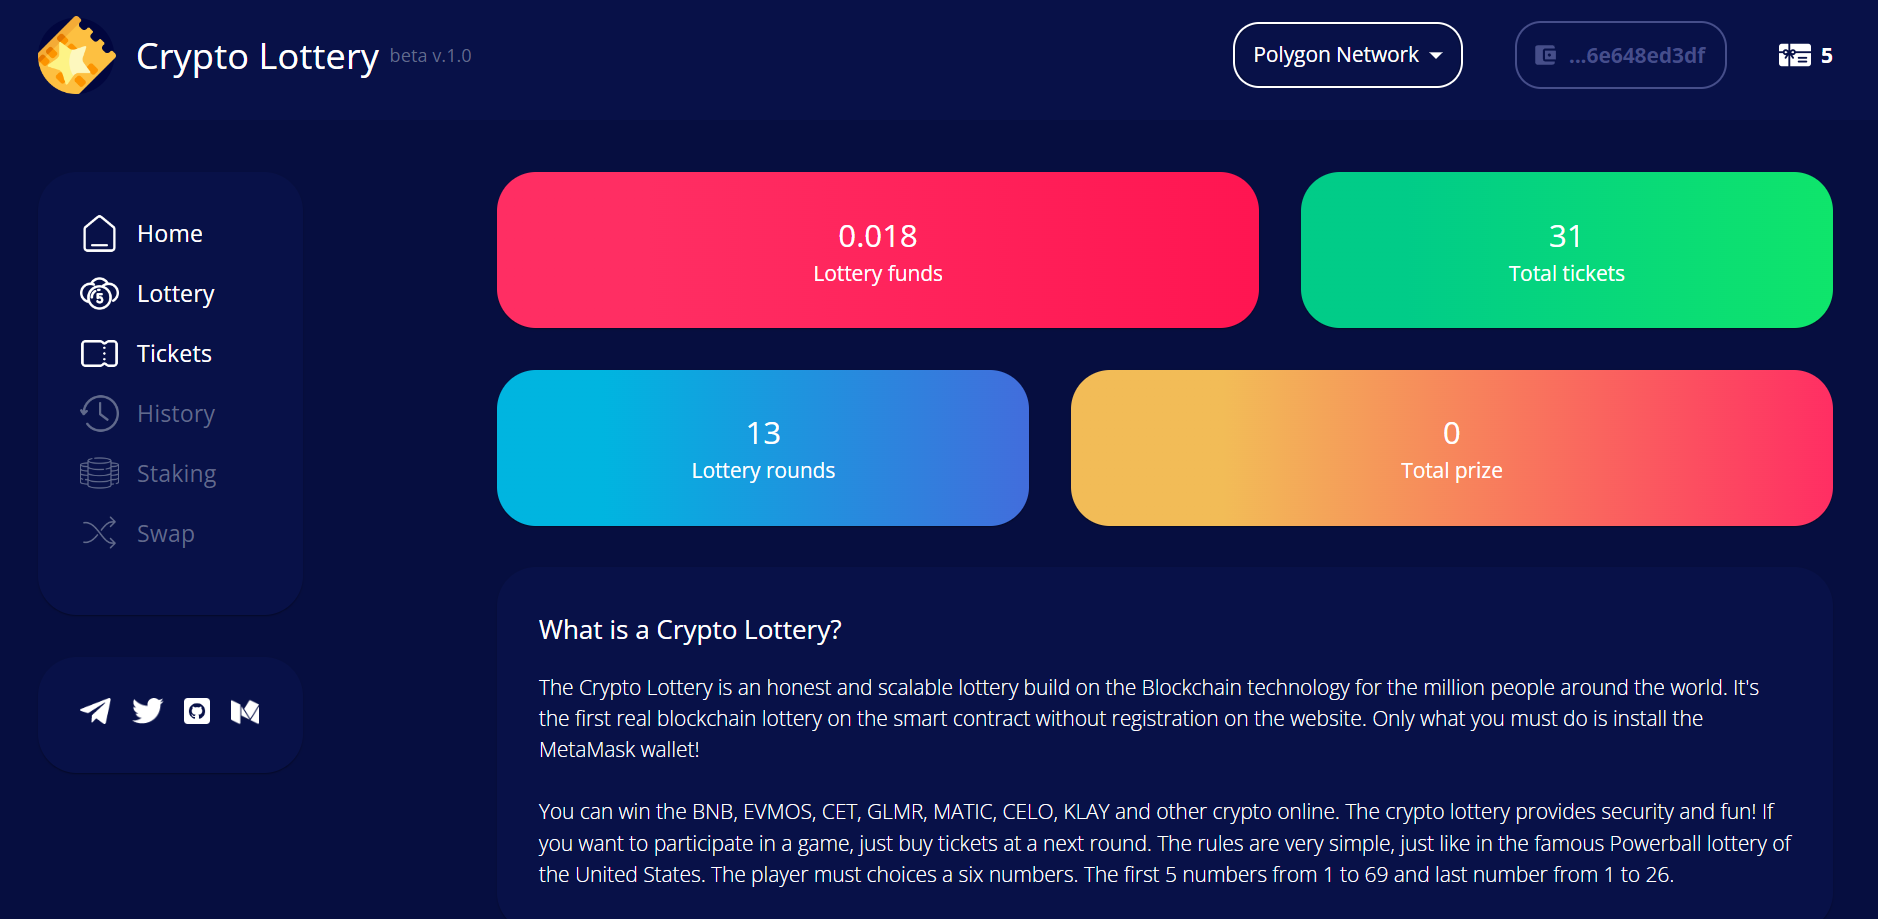 Is Crypto Lottery legal?